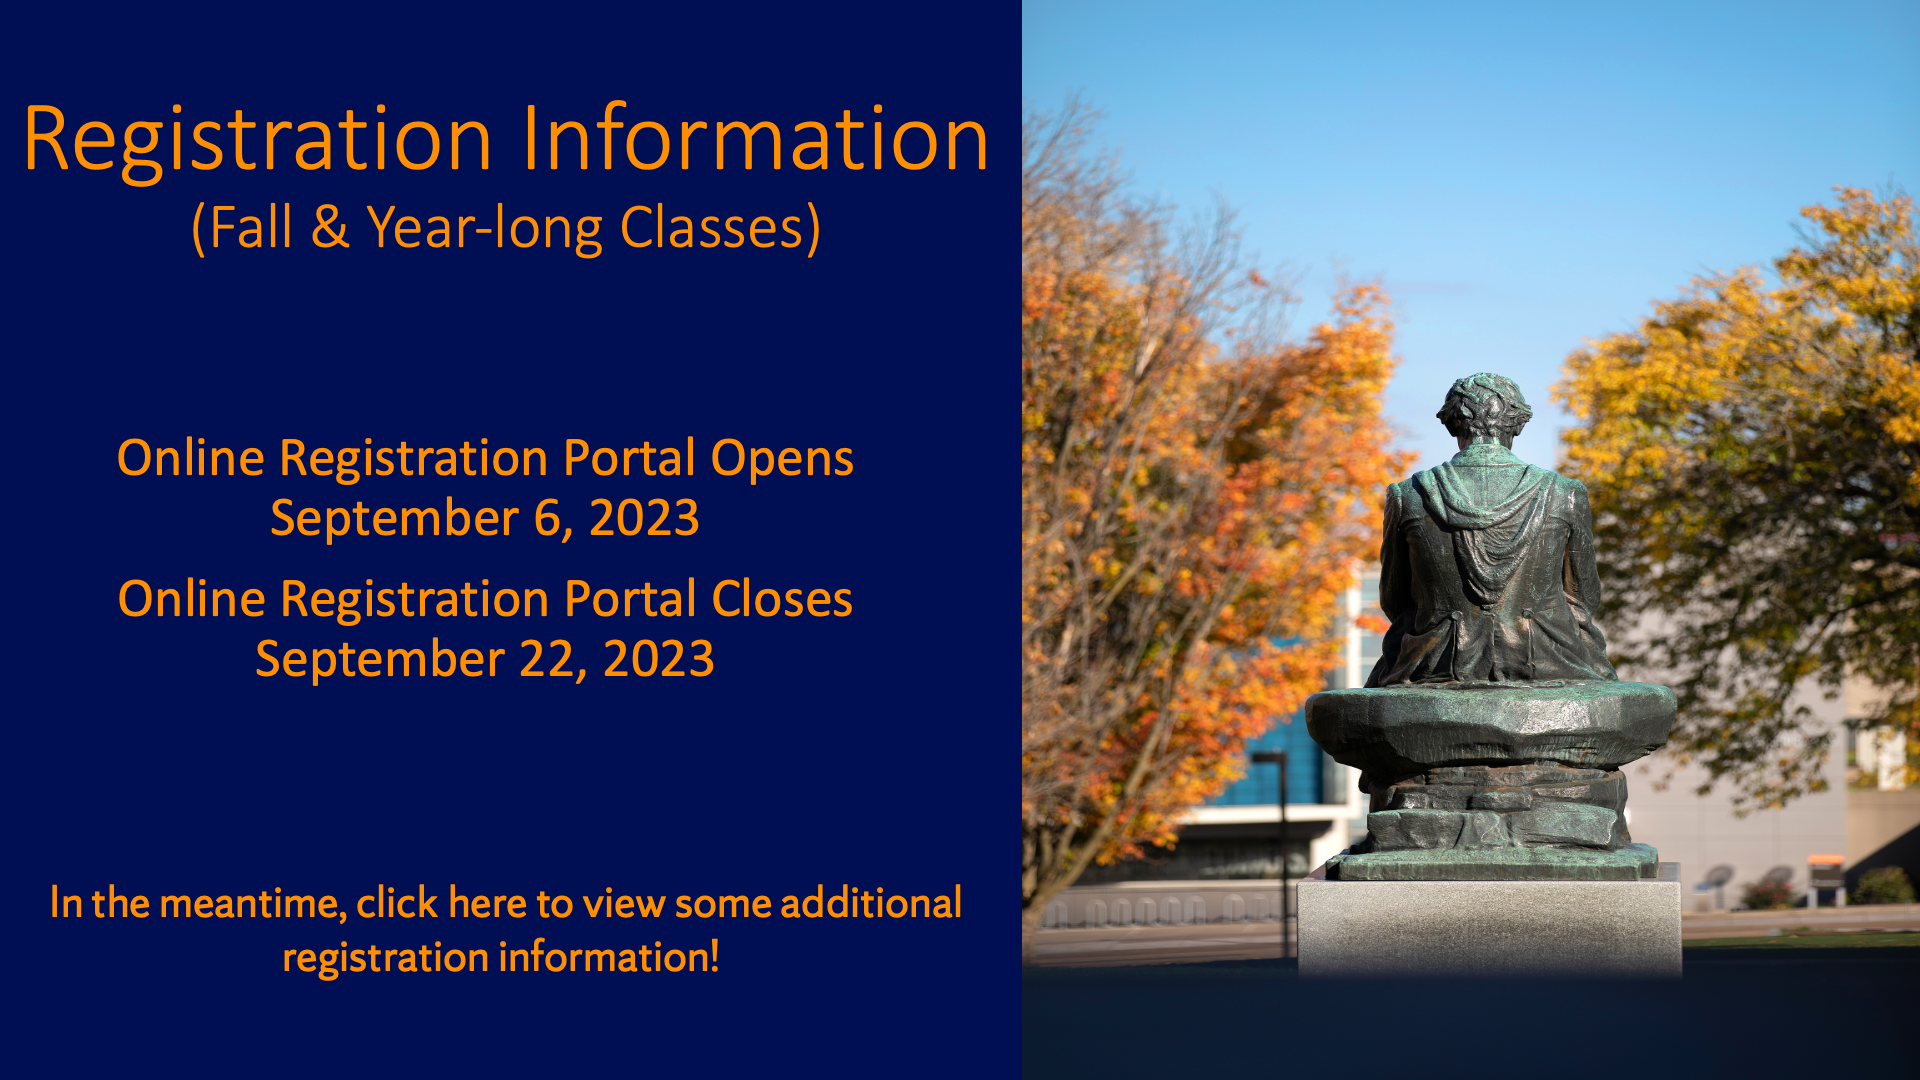 image of Statue on SU campus and Fall 2023 registration portal dates